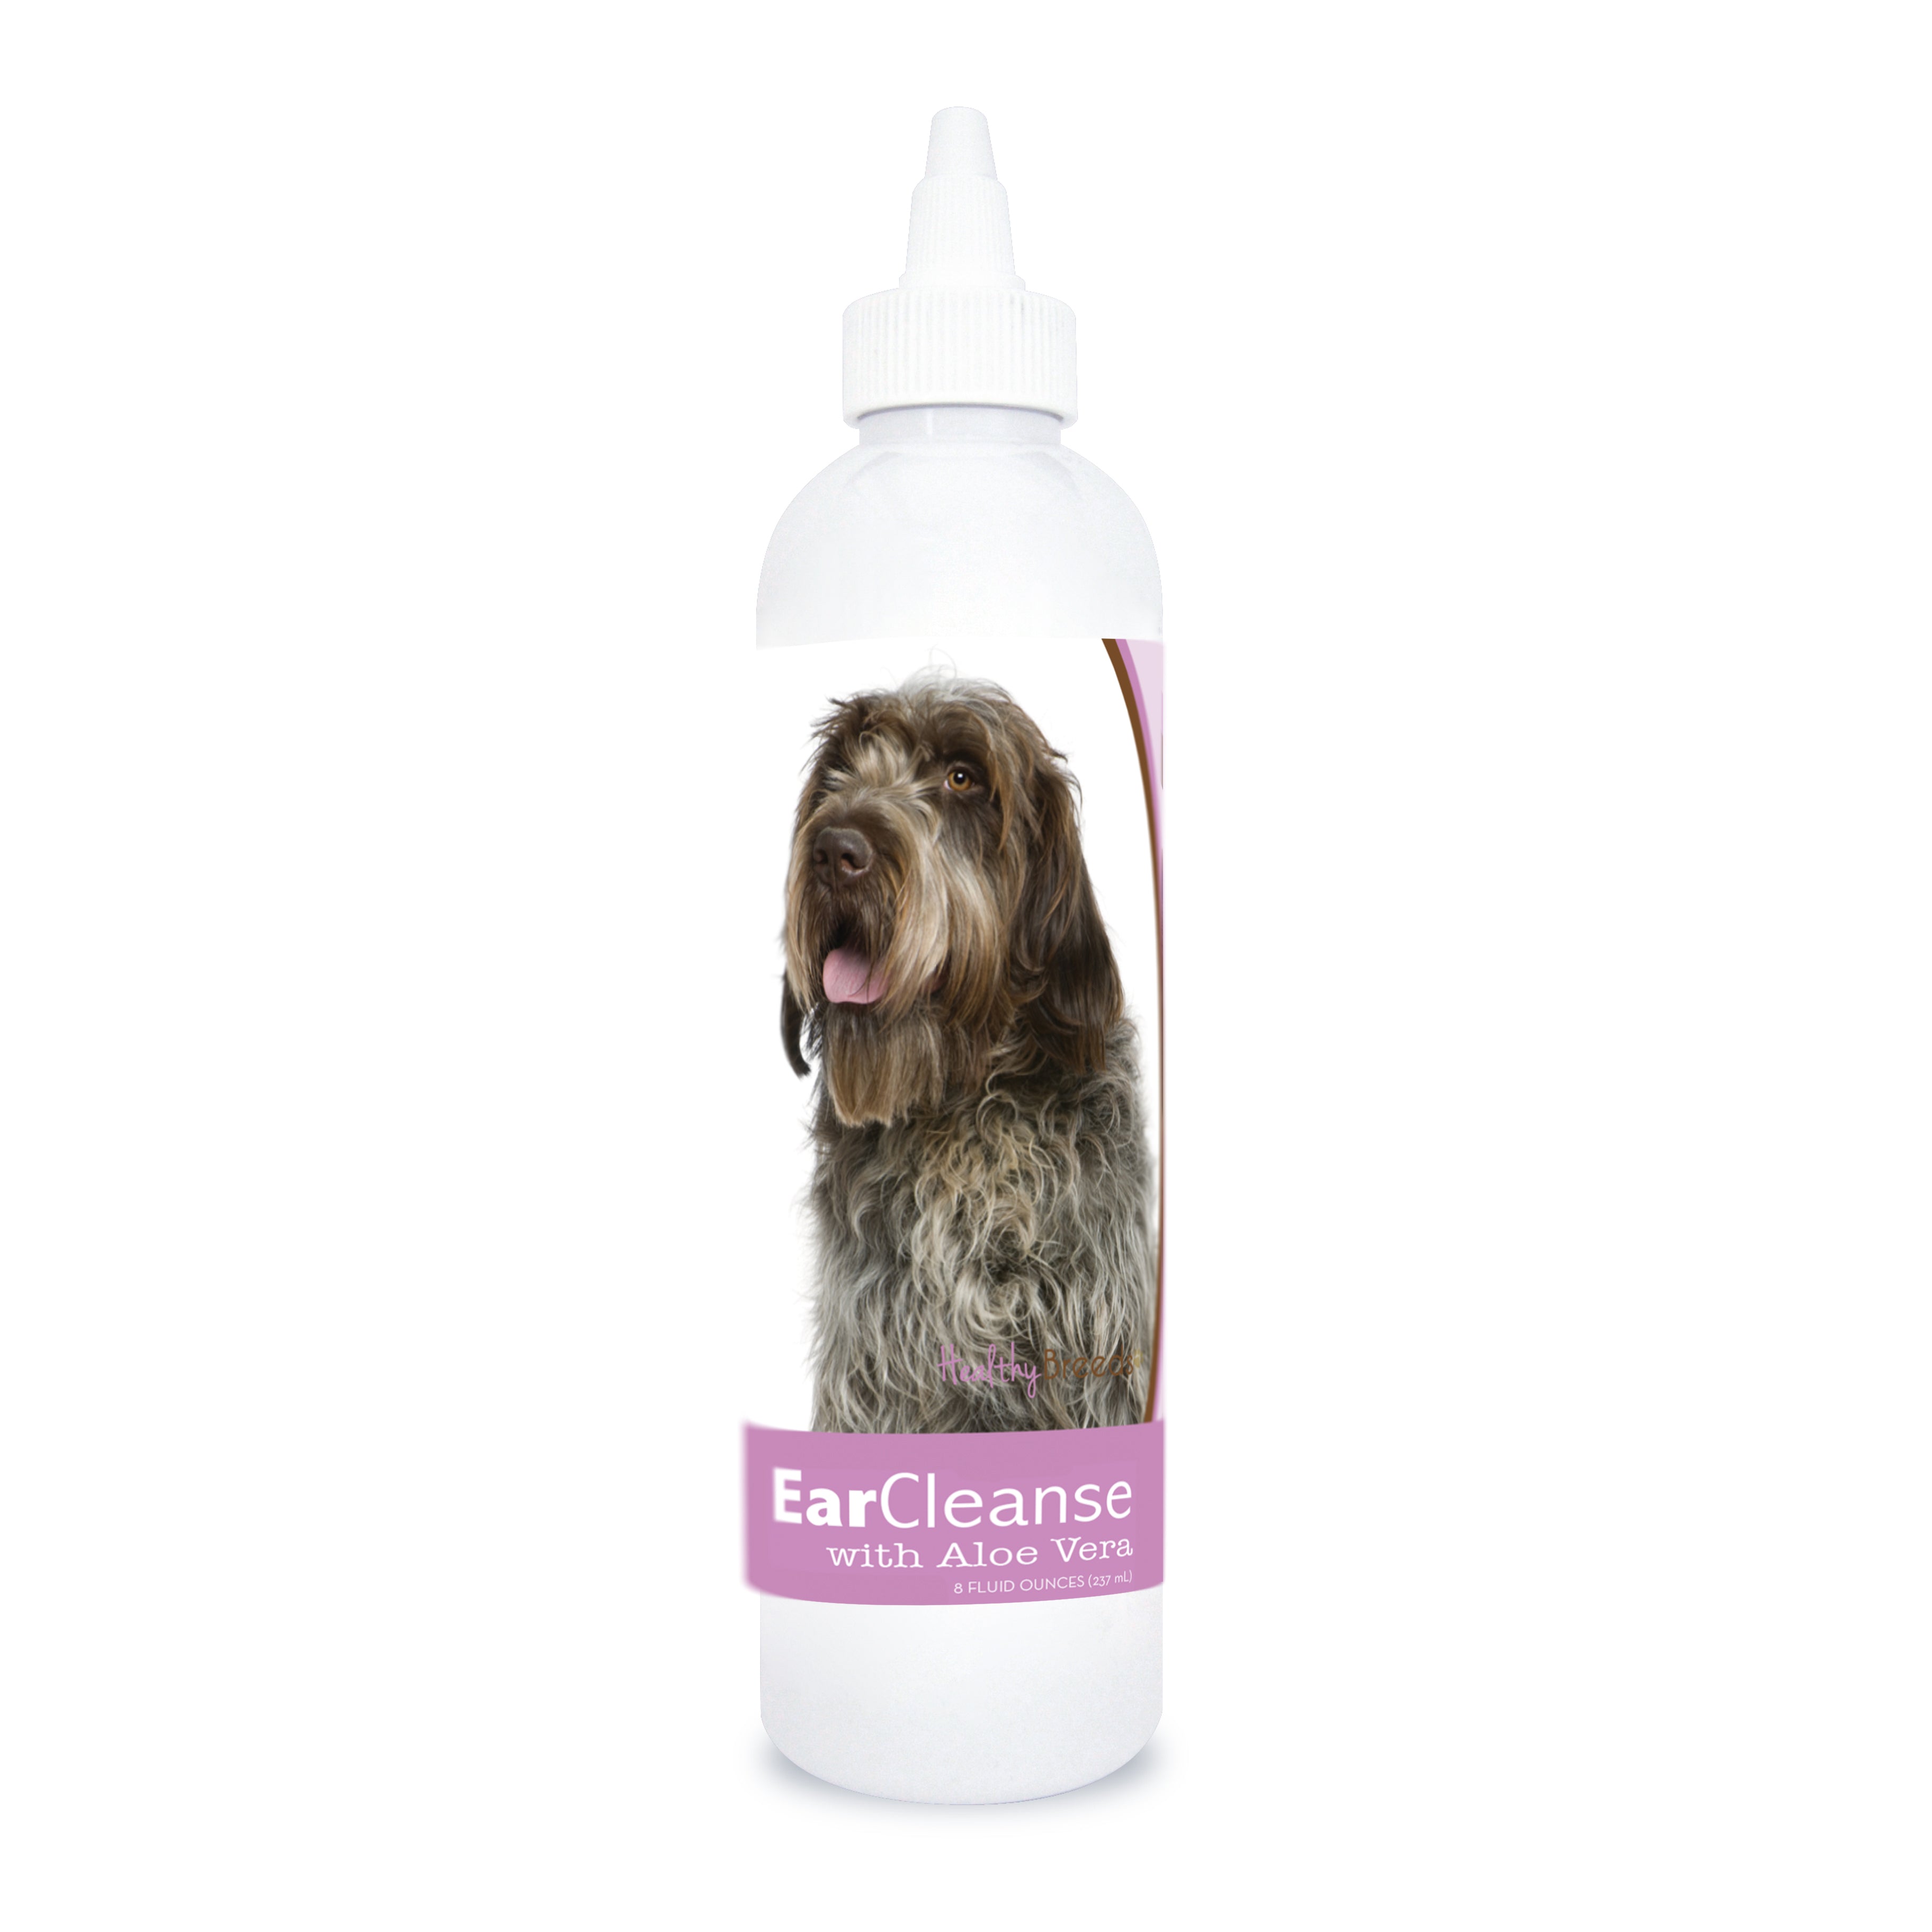 Wirehaired Pointing Griffon Ear Cleanse with Aloe Vera Sweet Pea and Vanilla 8 oz